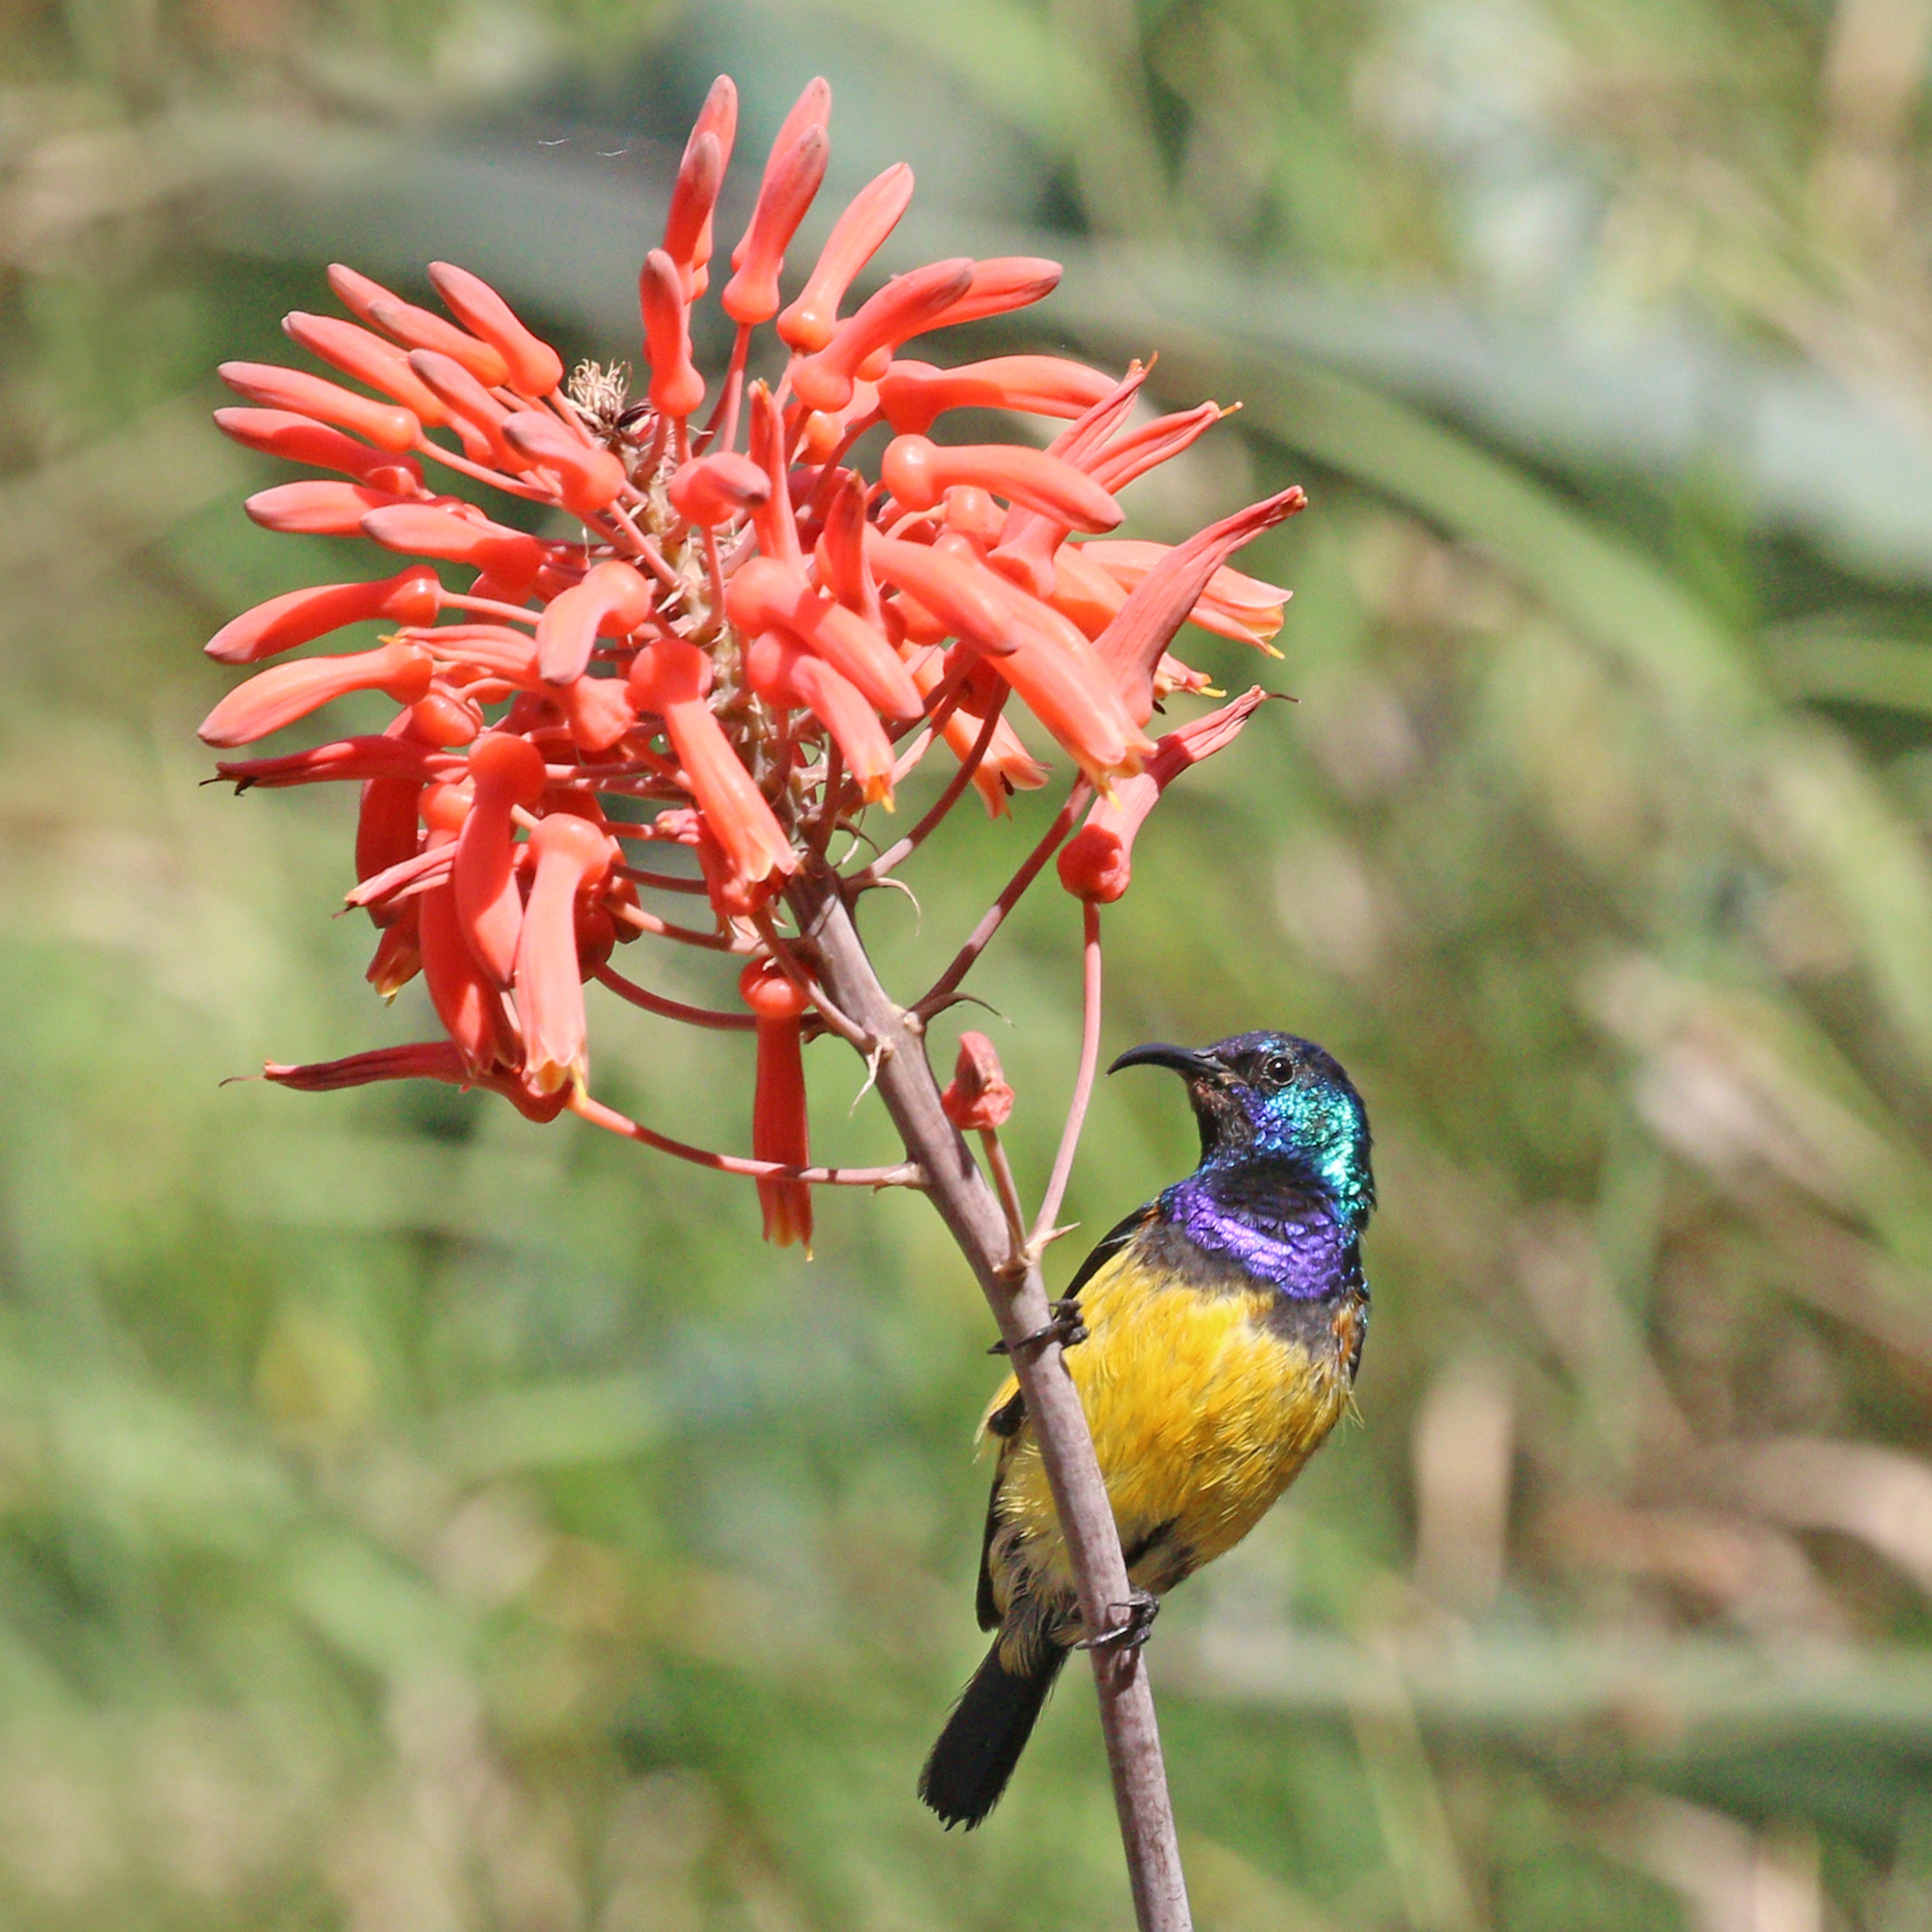 Colorful bird on the stalk of a flower